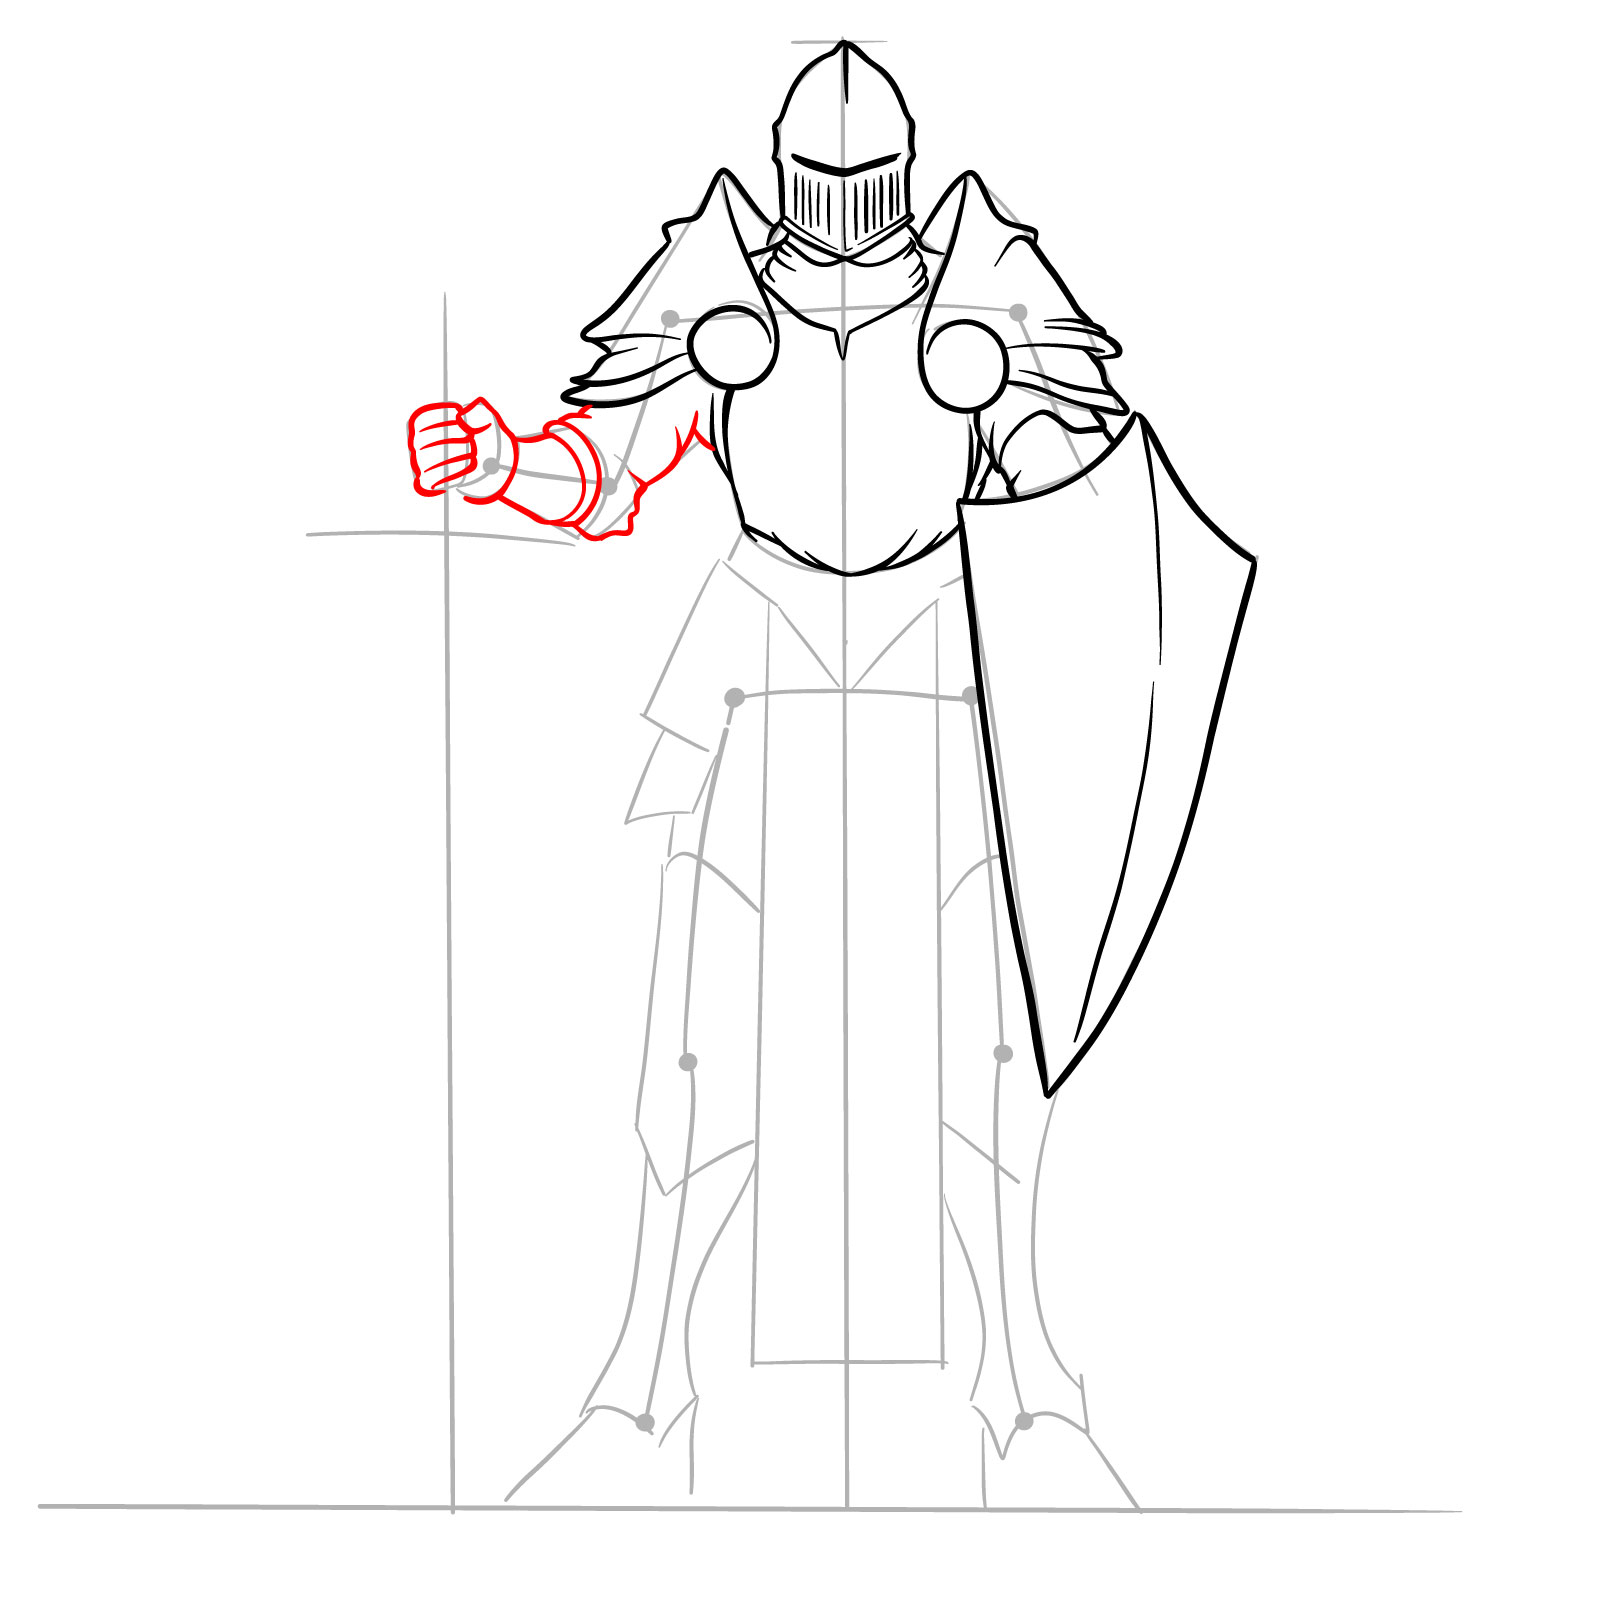 Realistic male paladin drawing step 12: arm and sword hand